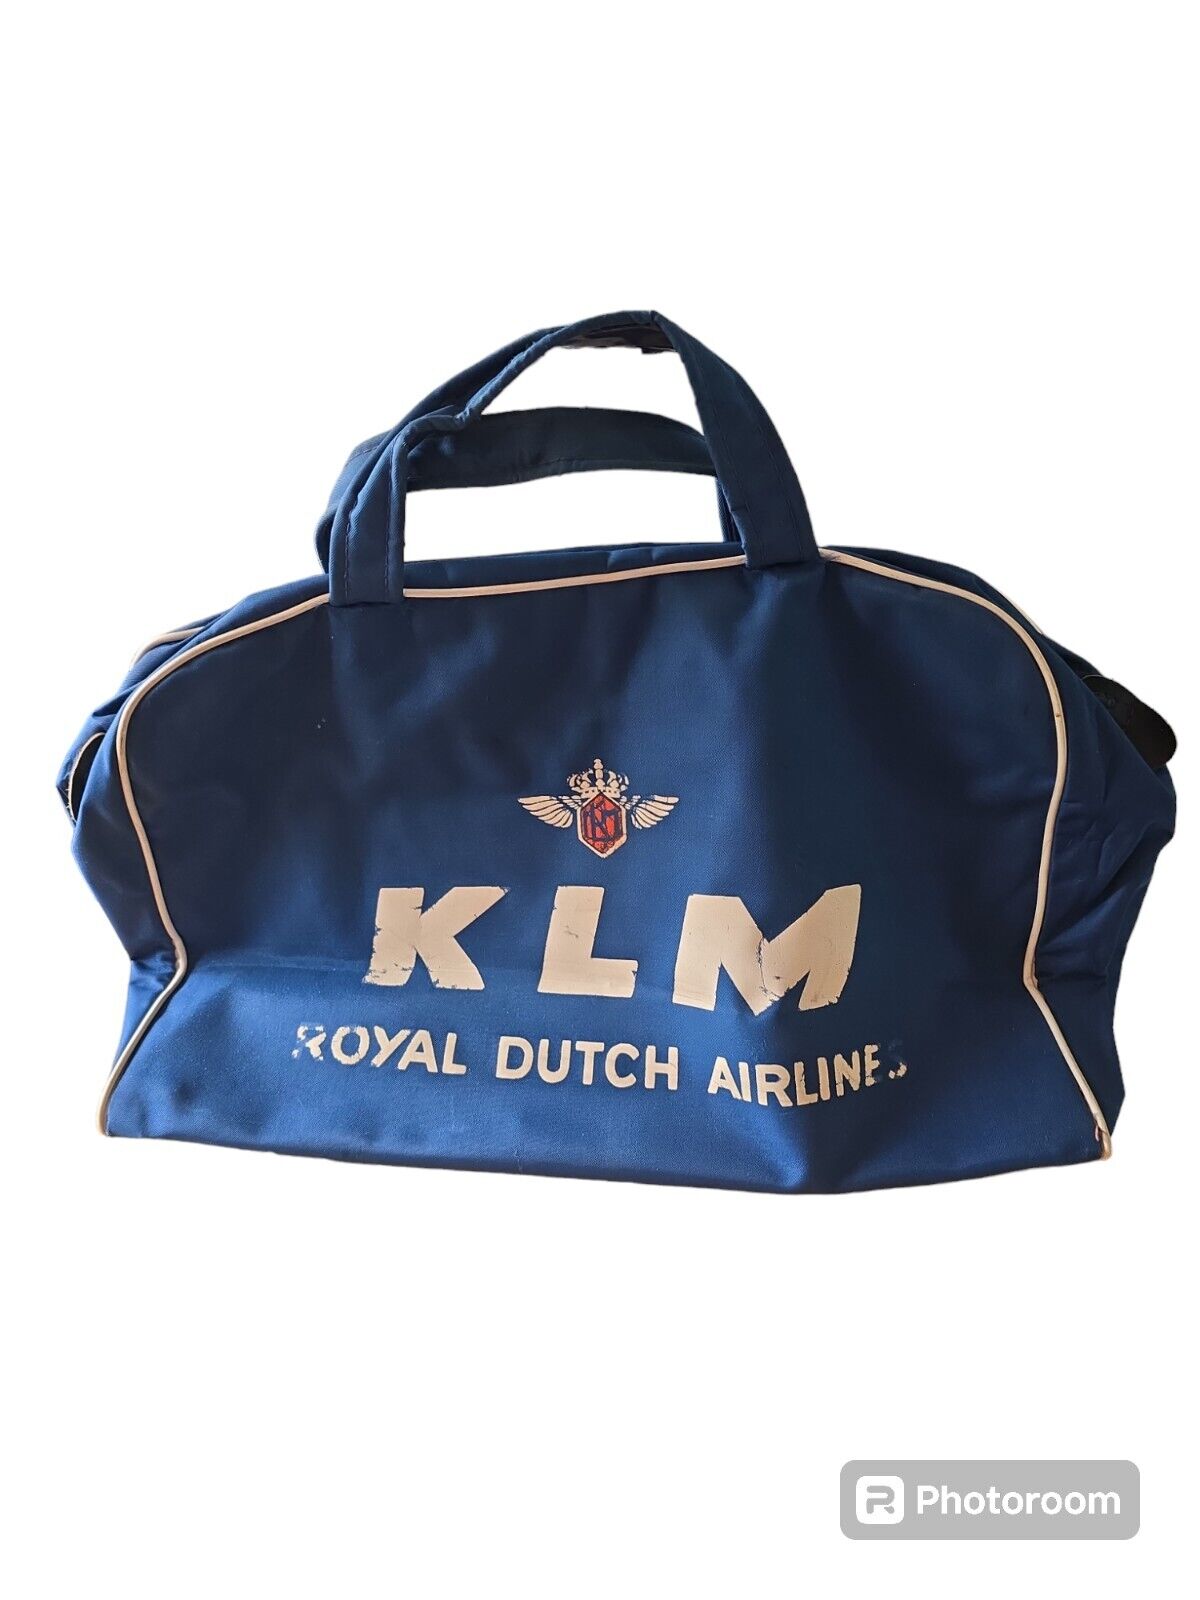 KLM ROYAL DUTCH AIRLINES NAVY BLUE VINYL FOOTED CARRY ON BAG WITH SIDE POCKET 